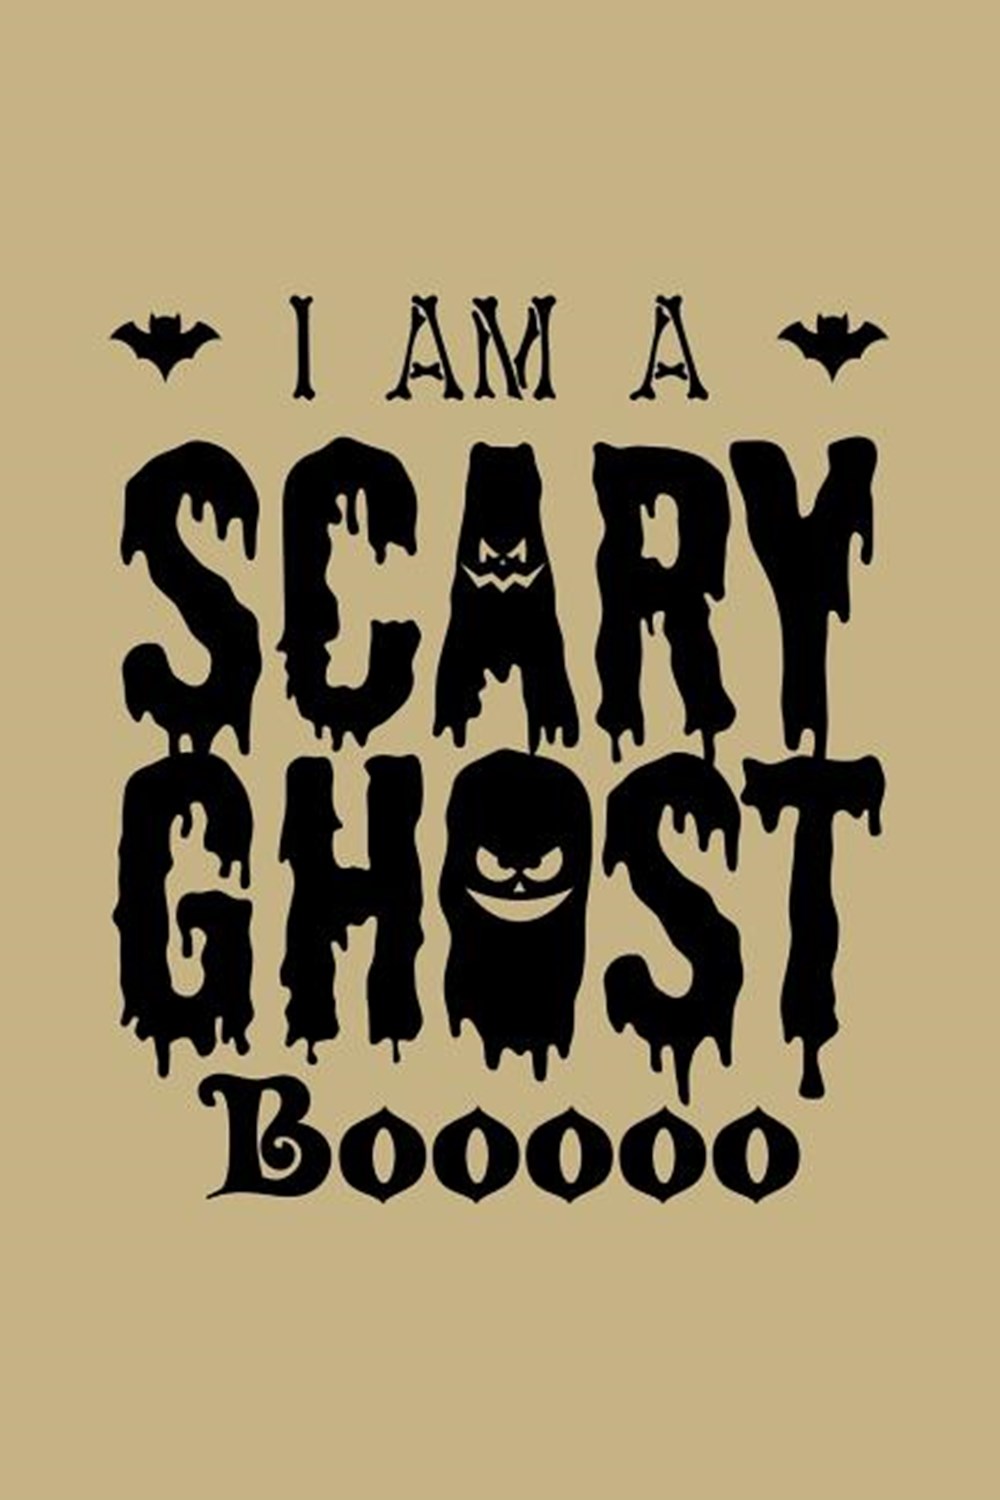 I Am A Scary Ghost Booooo Blank Paper Sketch Book - Artist Sketch Pad Journal for Sketching, Doodlin